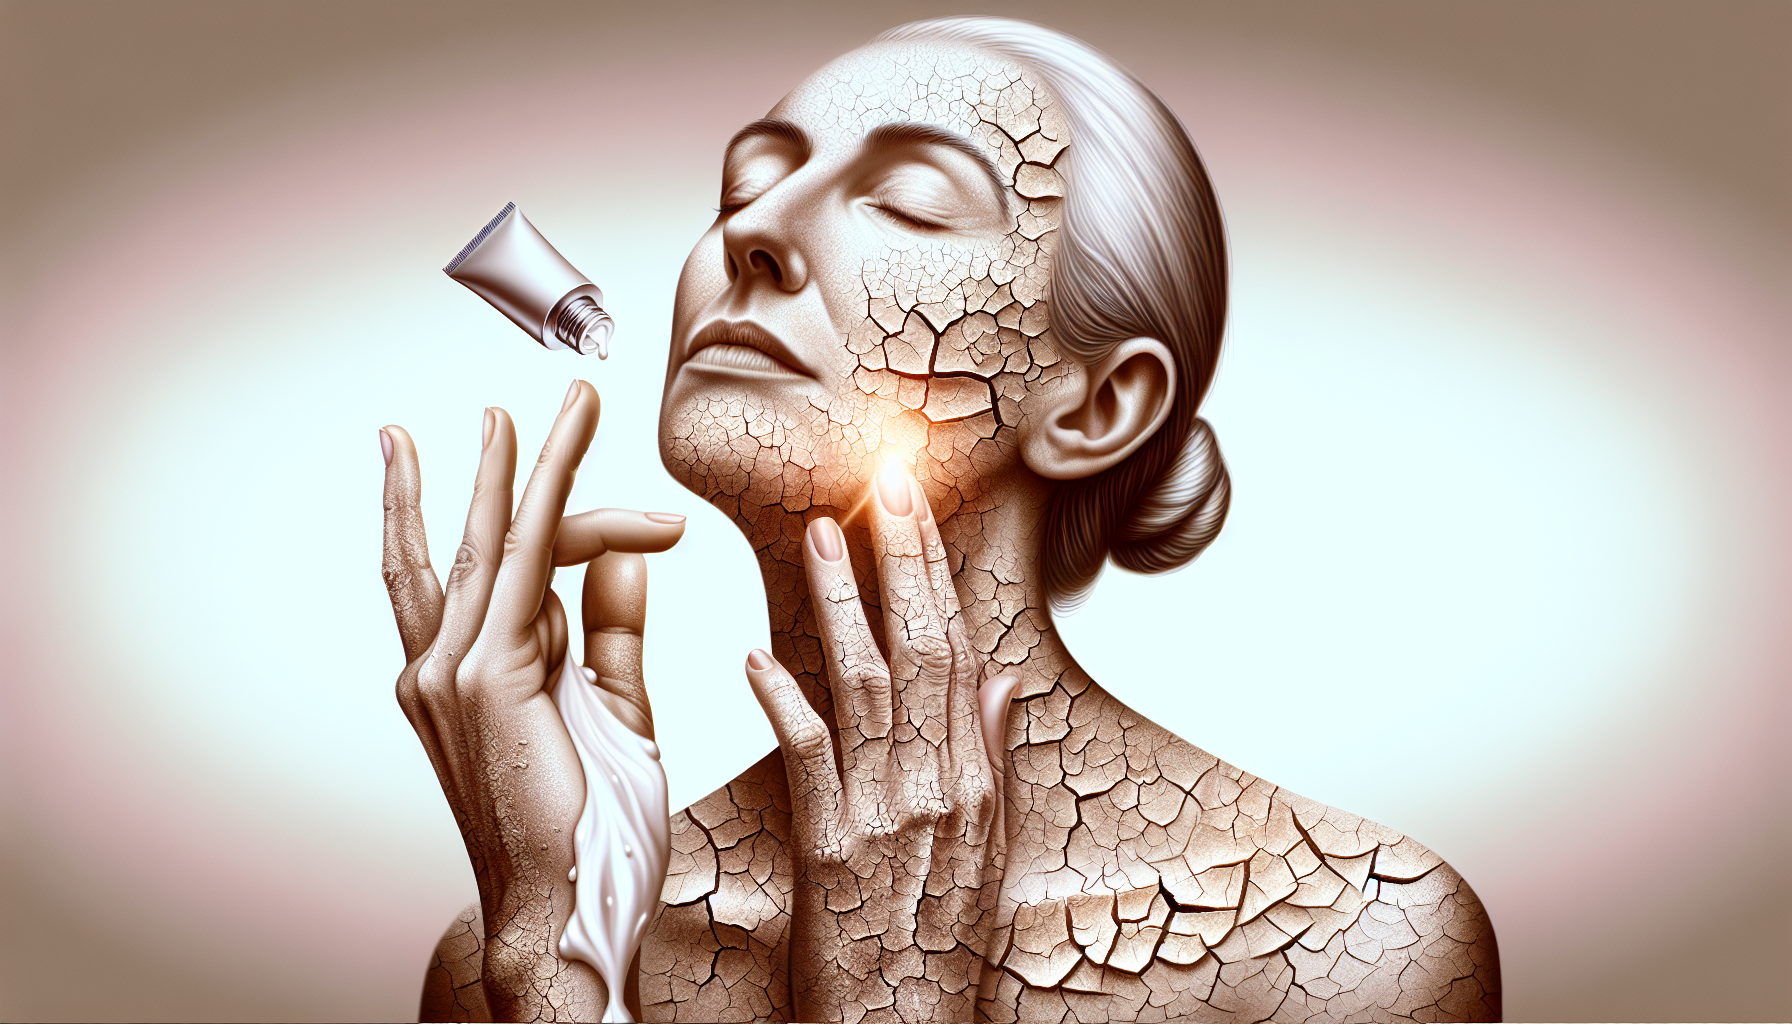 Illustration of person with dry skin being hydrated by ceramide moisturizer